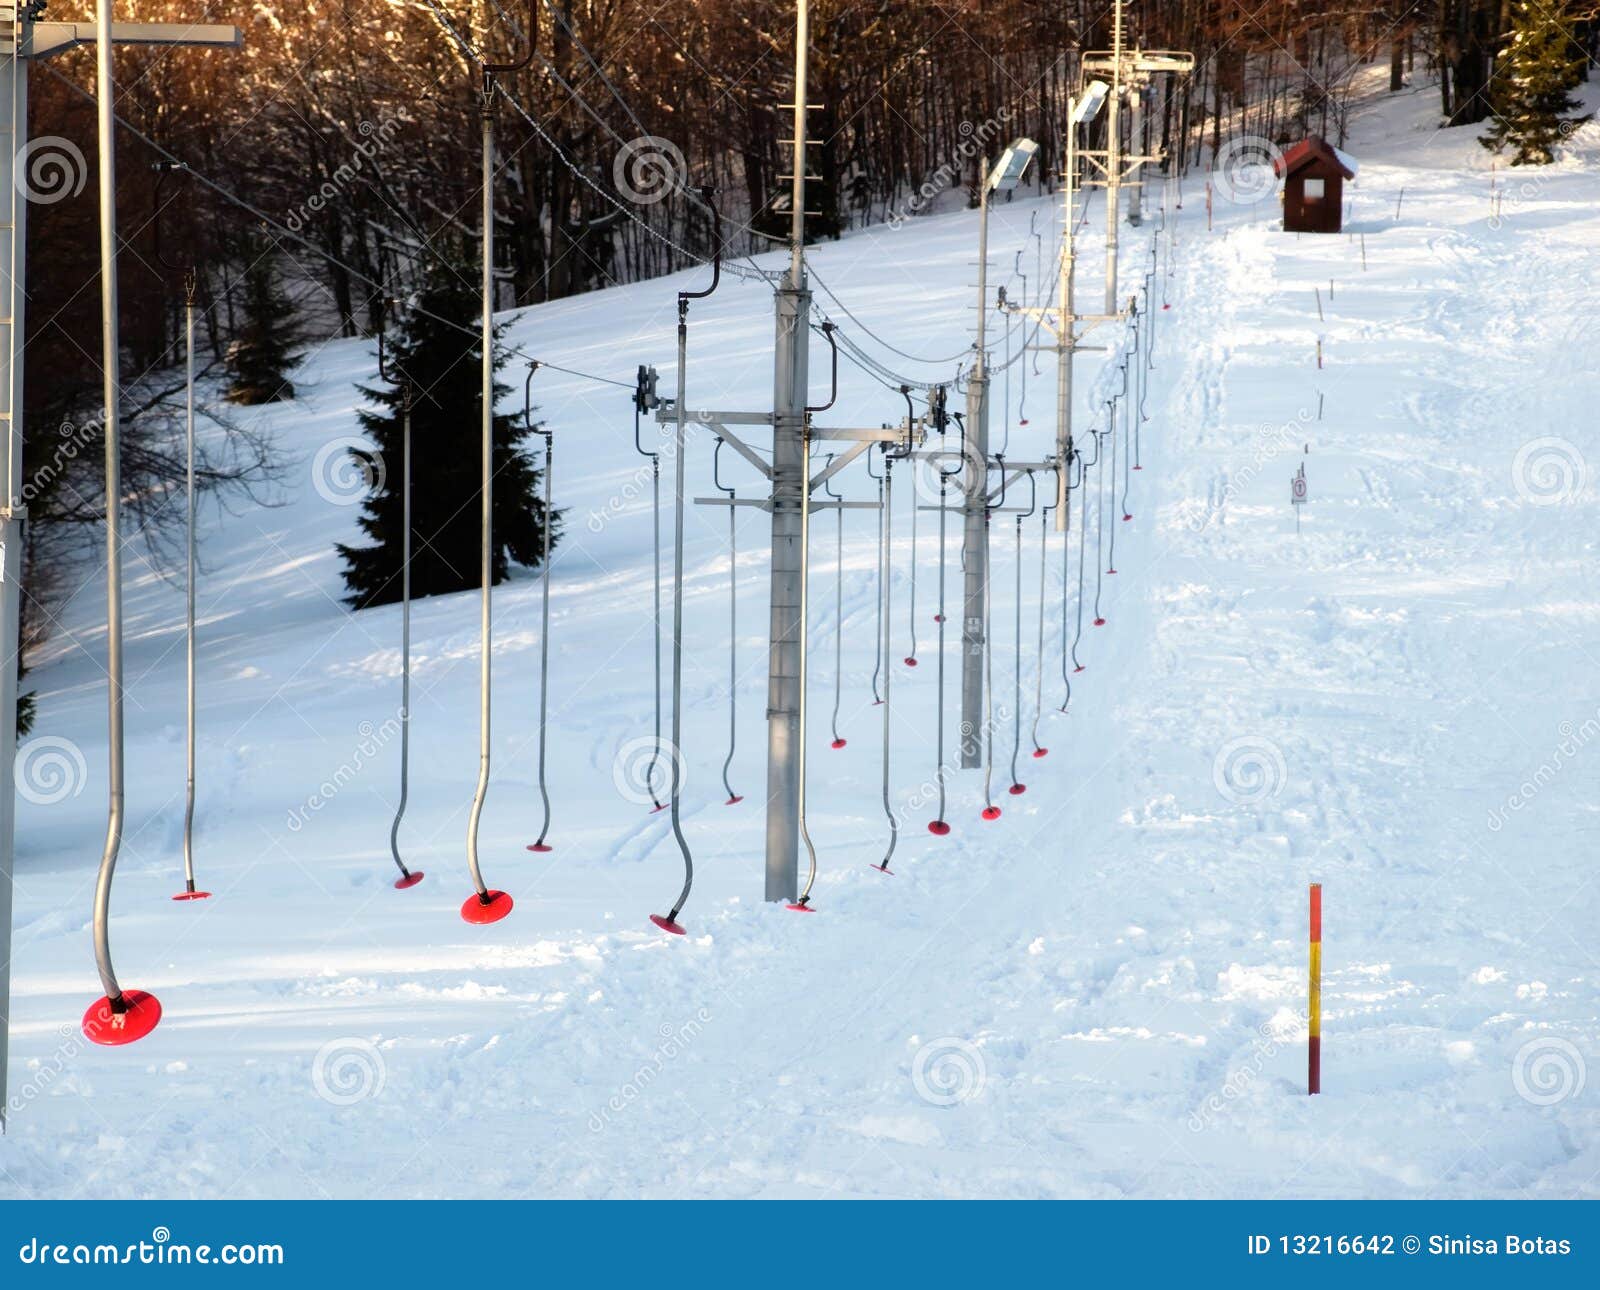 Ski Lift Stock Photography Image 13216642 throughout The Most Awesome and also Stunning how to use ski lift intended for Fantasy